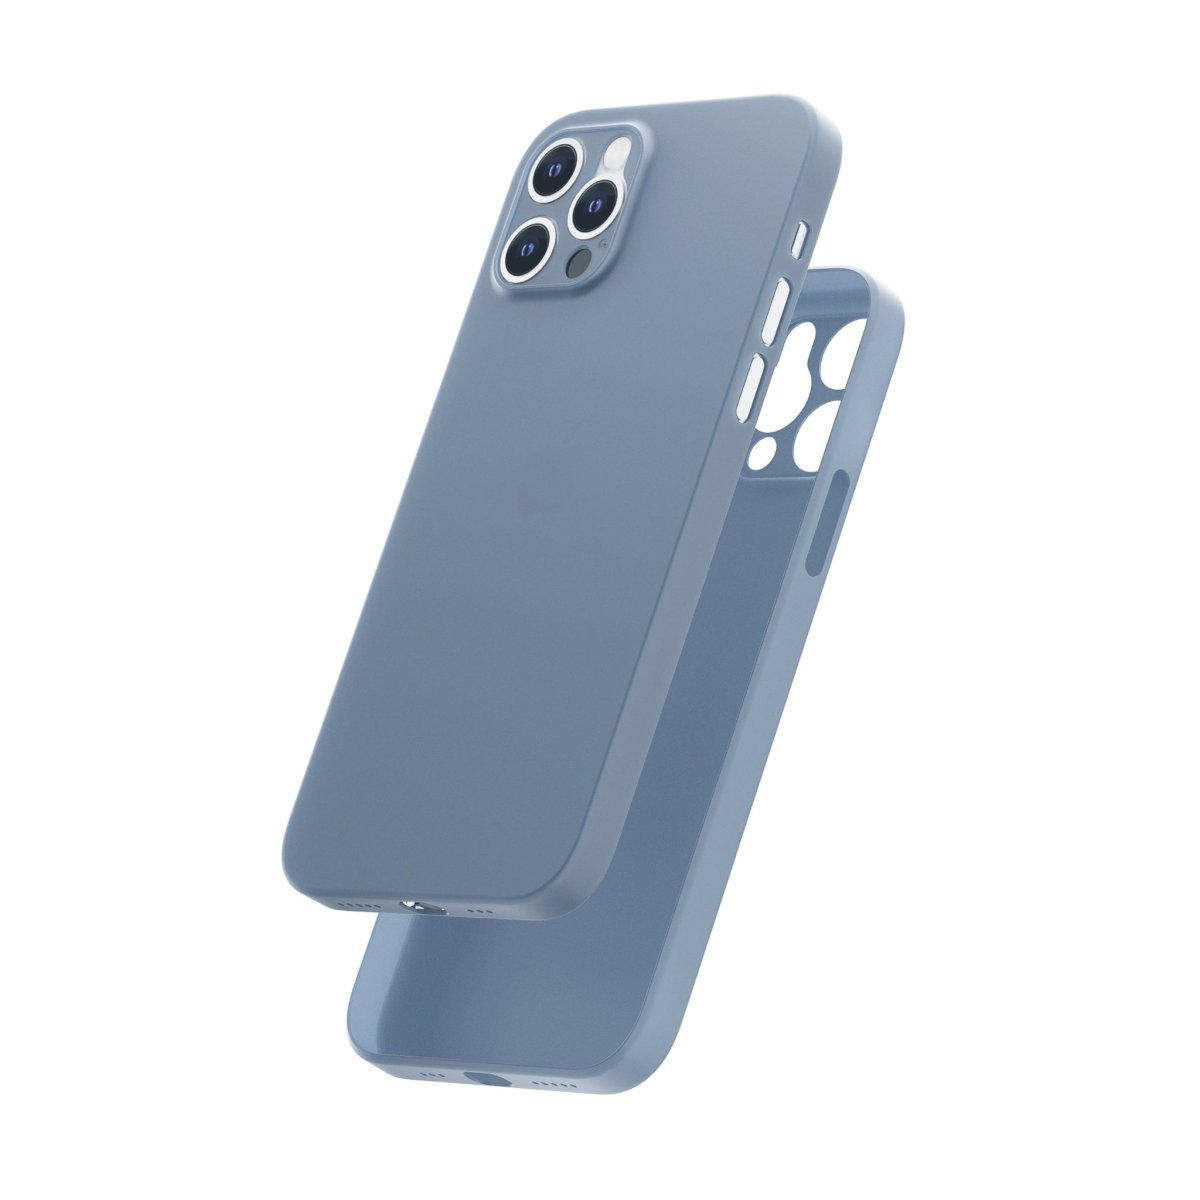 Slimcase Mobile Back Cover for iPhone 12 Pro Max - Slimcase IndiaCase